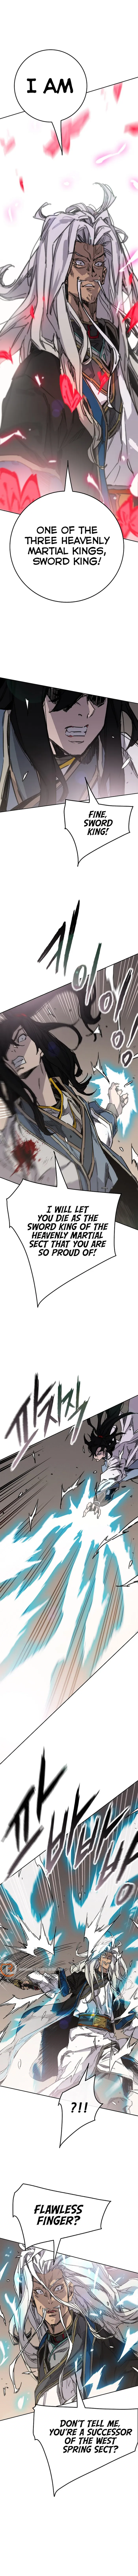 The Undefeatable Swordsman - Chapter 188 Page 3